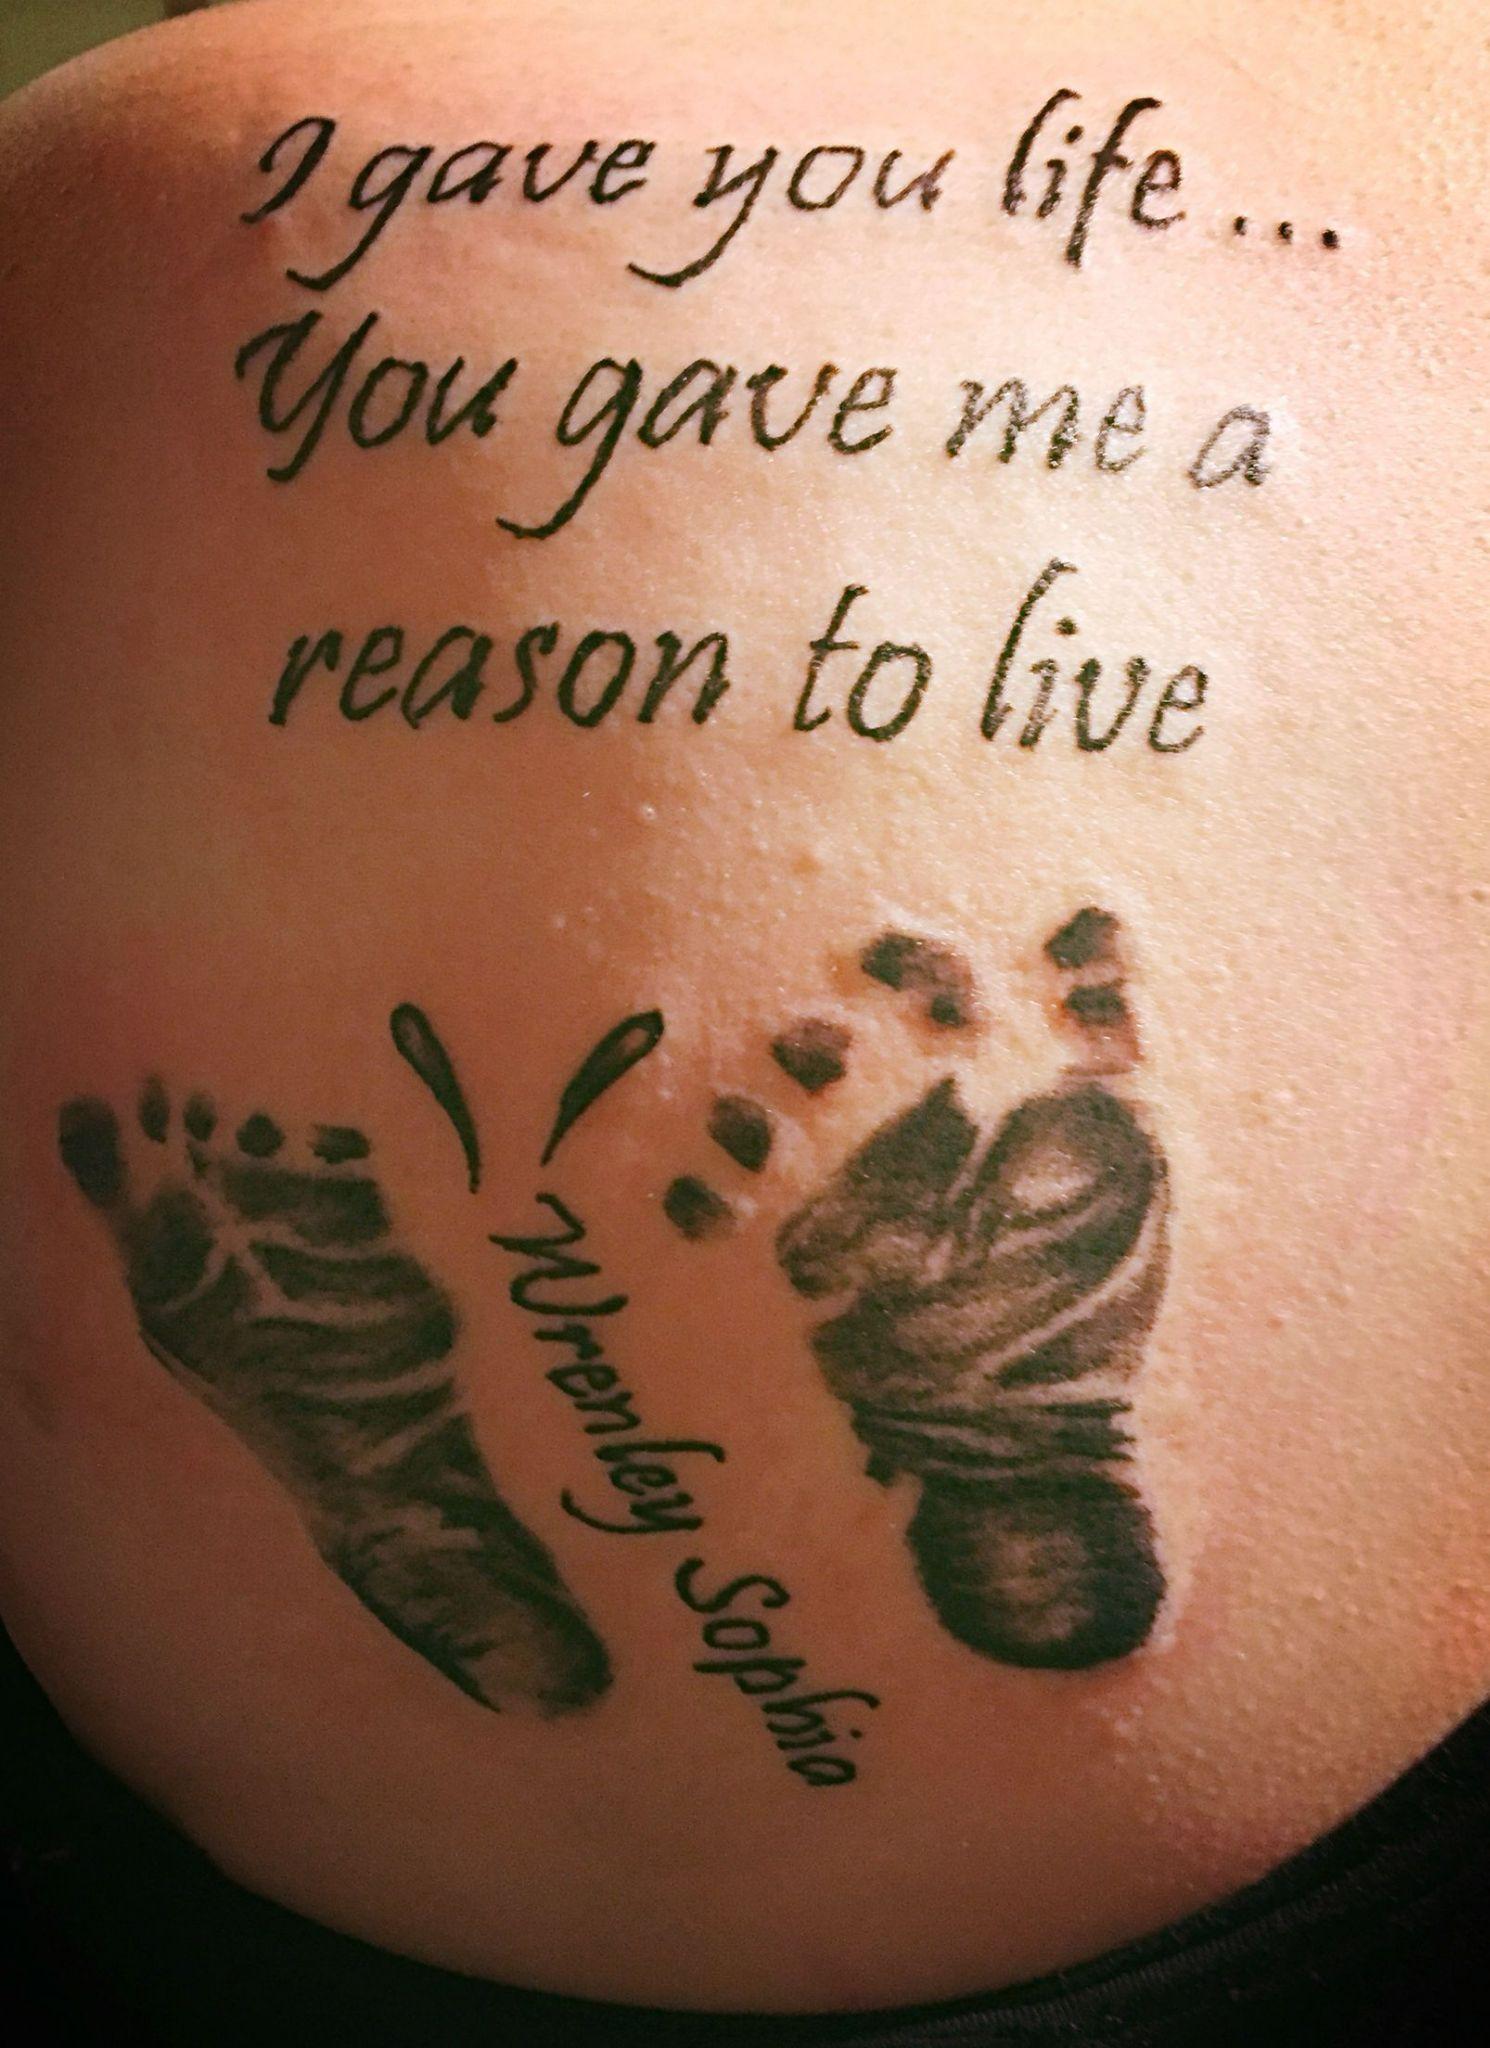 Quote tattoo- Baby Footprint Tattoo - Baby Journey